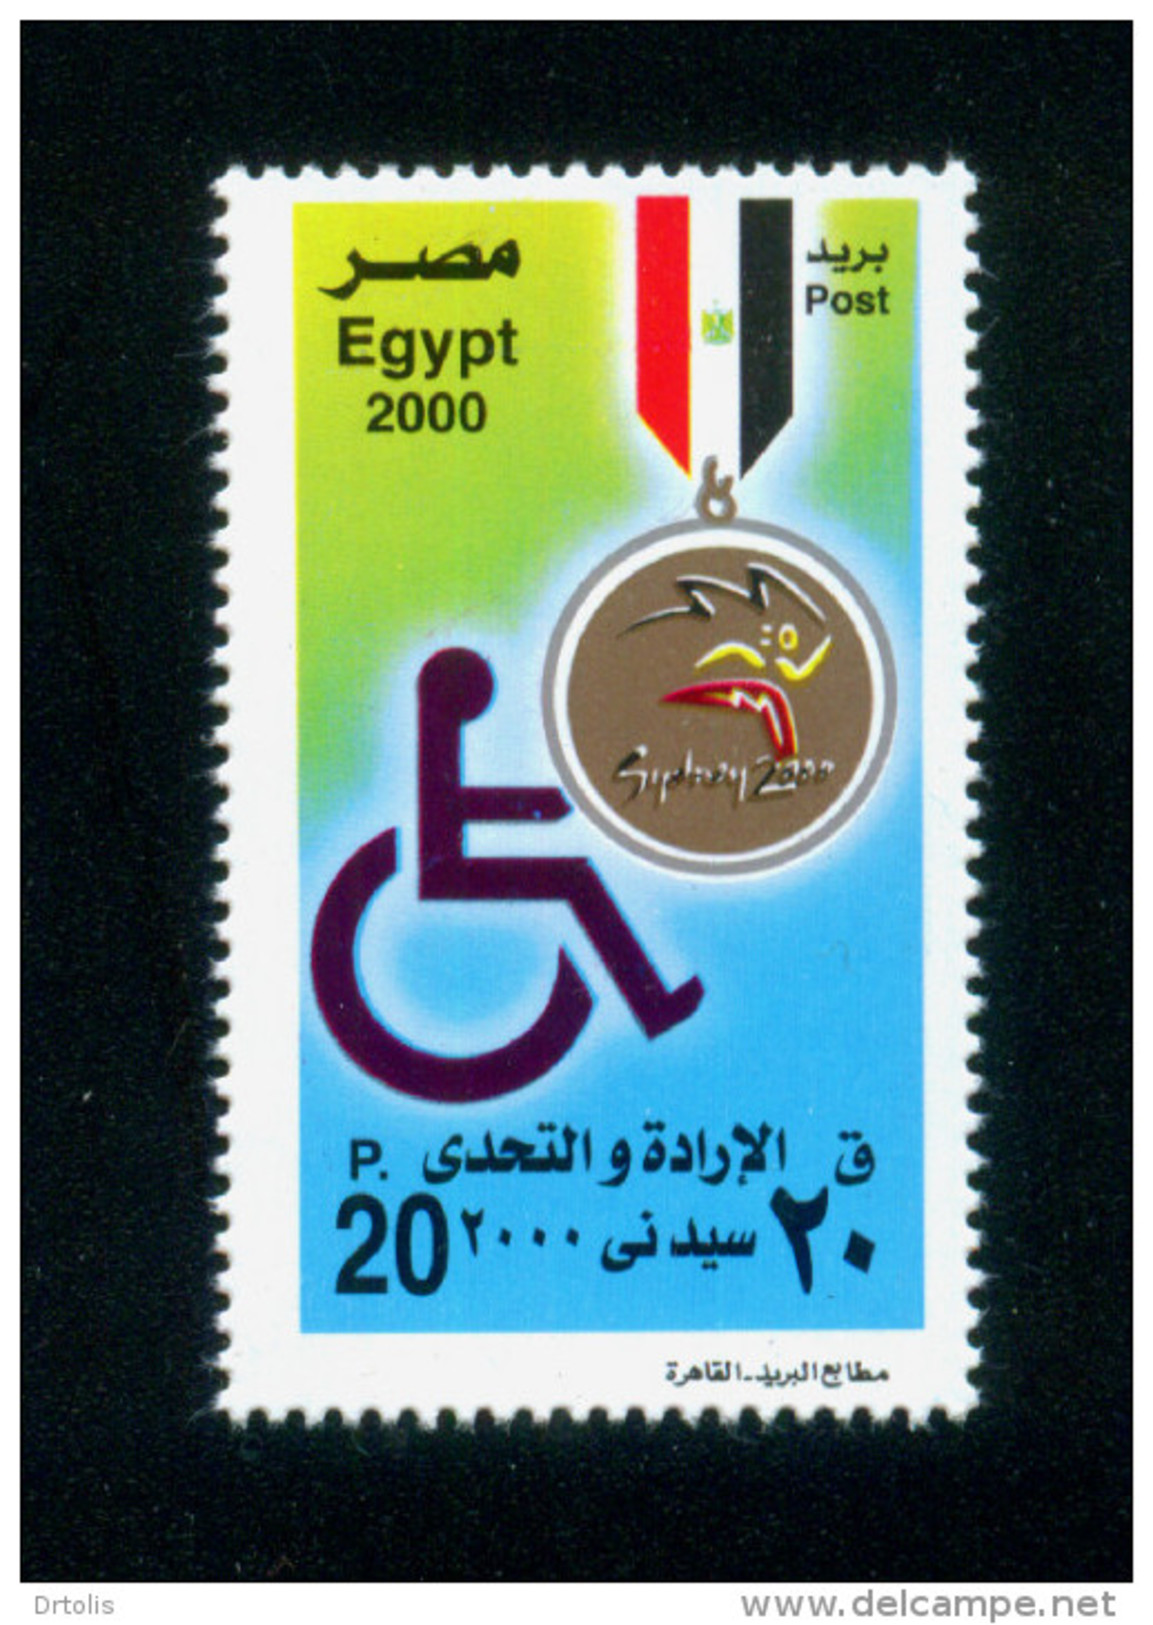 EGYPT / 2000 / SPORT / OLYMPIC GAMES / SYDNEY 2000 / DISABLED PERSON´S DAY / FLAG / MEDAL / MNH / VF. - Unused Stamps